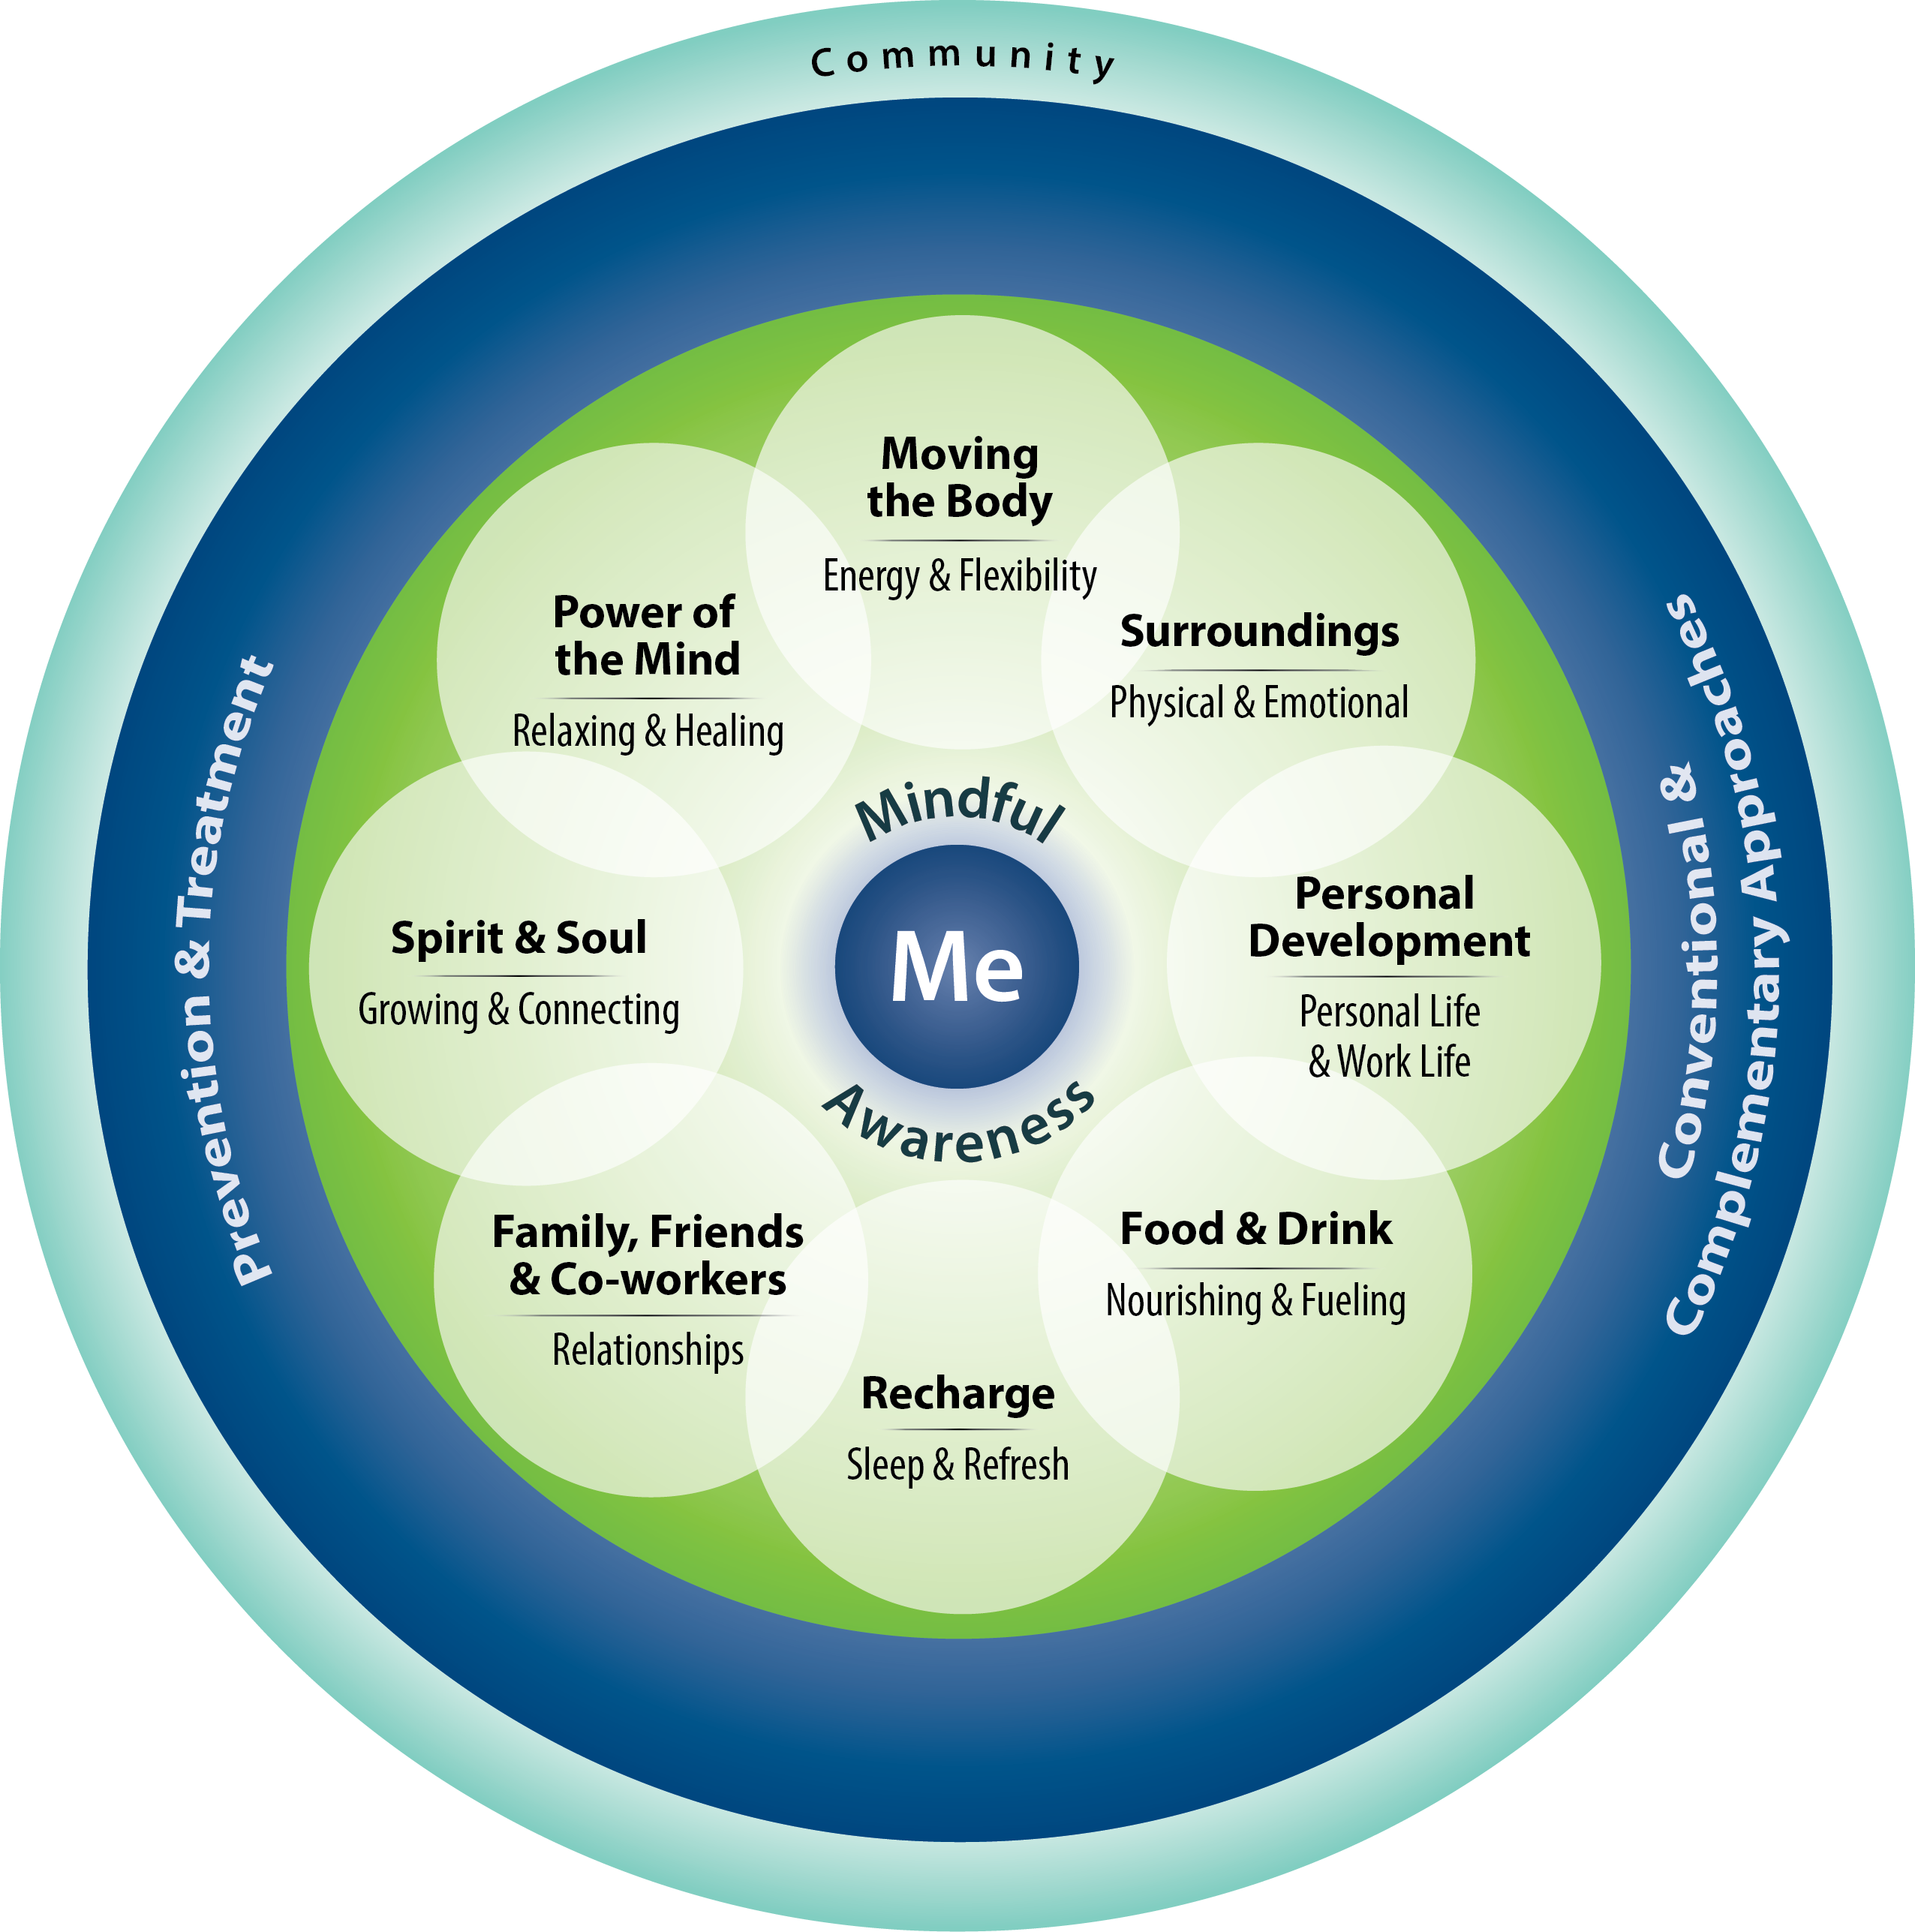 Circle of Health - Components of Proactive Health and Well-Being Model: The “Circle of Health” Large light blue circle that says “community”. Inside that circle is a dark blue circle that says “Prevention & Treatment” on the left and “Conventional & Complementary Approaches” on the right. Inside of that is a bright green circle. Overlaid on the bright green circle are smaller white circles. Clockwise from the top they say; “Moving the Body; Energy & Flexibility,” “Surroundings; Physical &Emotional,” “Personal Development; Personal Life & Work Life,” “Food & Drink; Nourishing & Fueling,” “Recharge; Sleep & Refresh,” “Family, Friends & Co-workers; Relationships,” “Spirit & Soul; Growing & Connecting,” and “Power of the Mind; Relaxing & Healing.” At the center of this graphic is a small blue circle that says “Me.” Above the circle it says “Mindful” and below the circle it says “Awareness.”